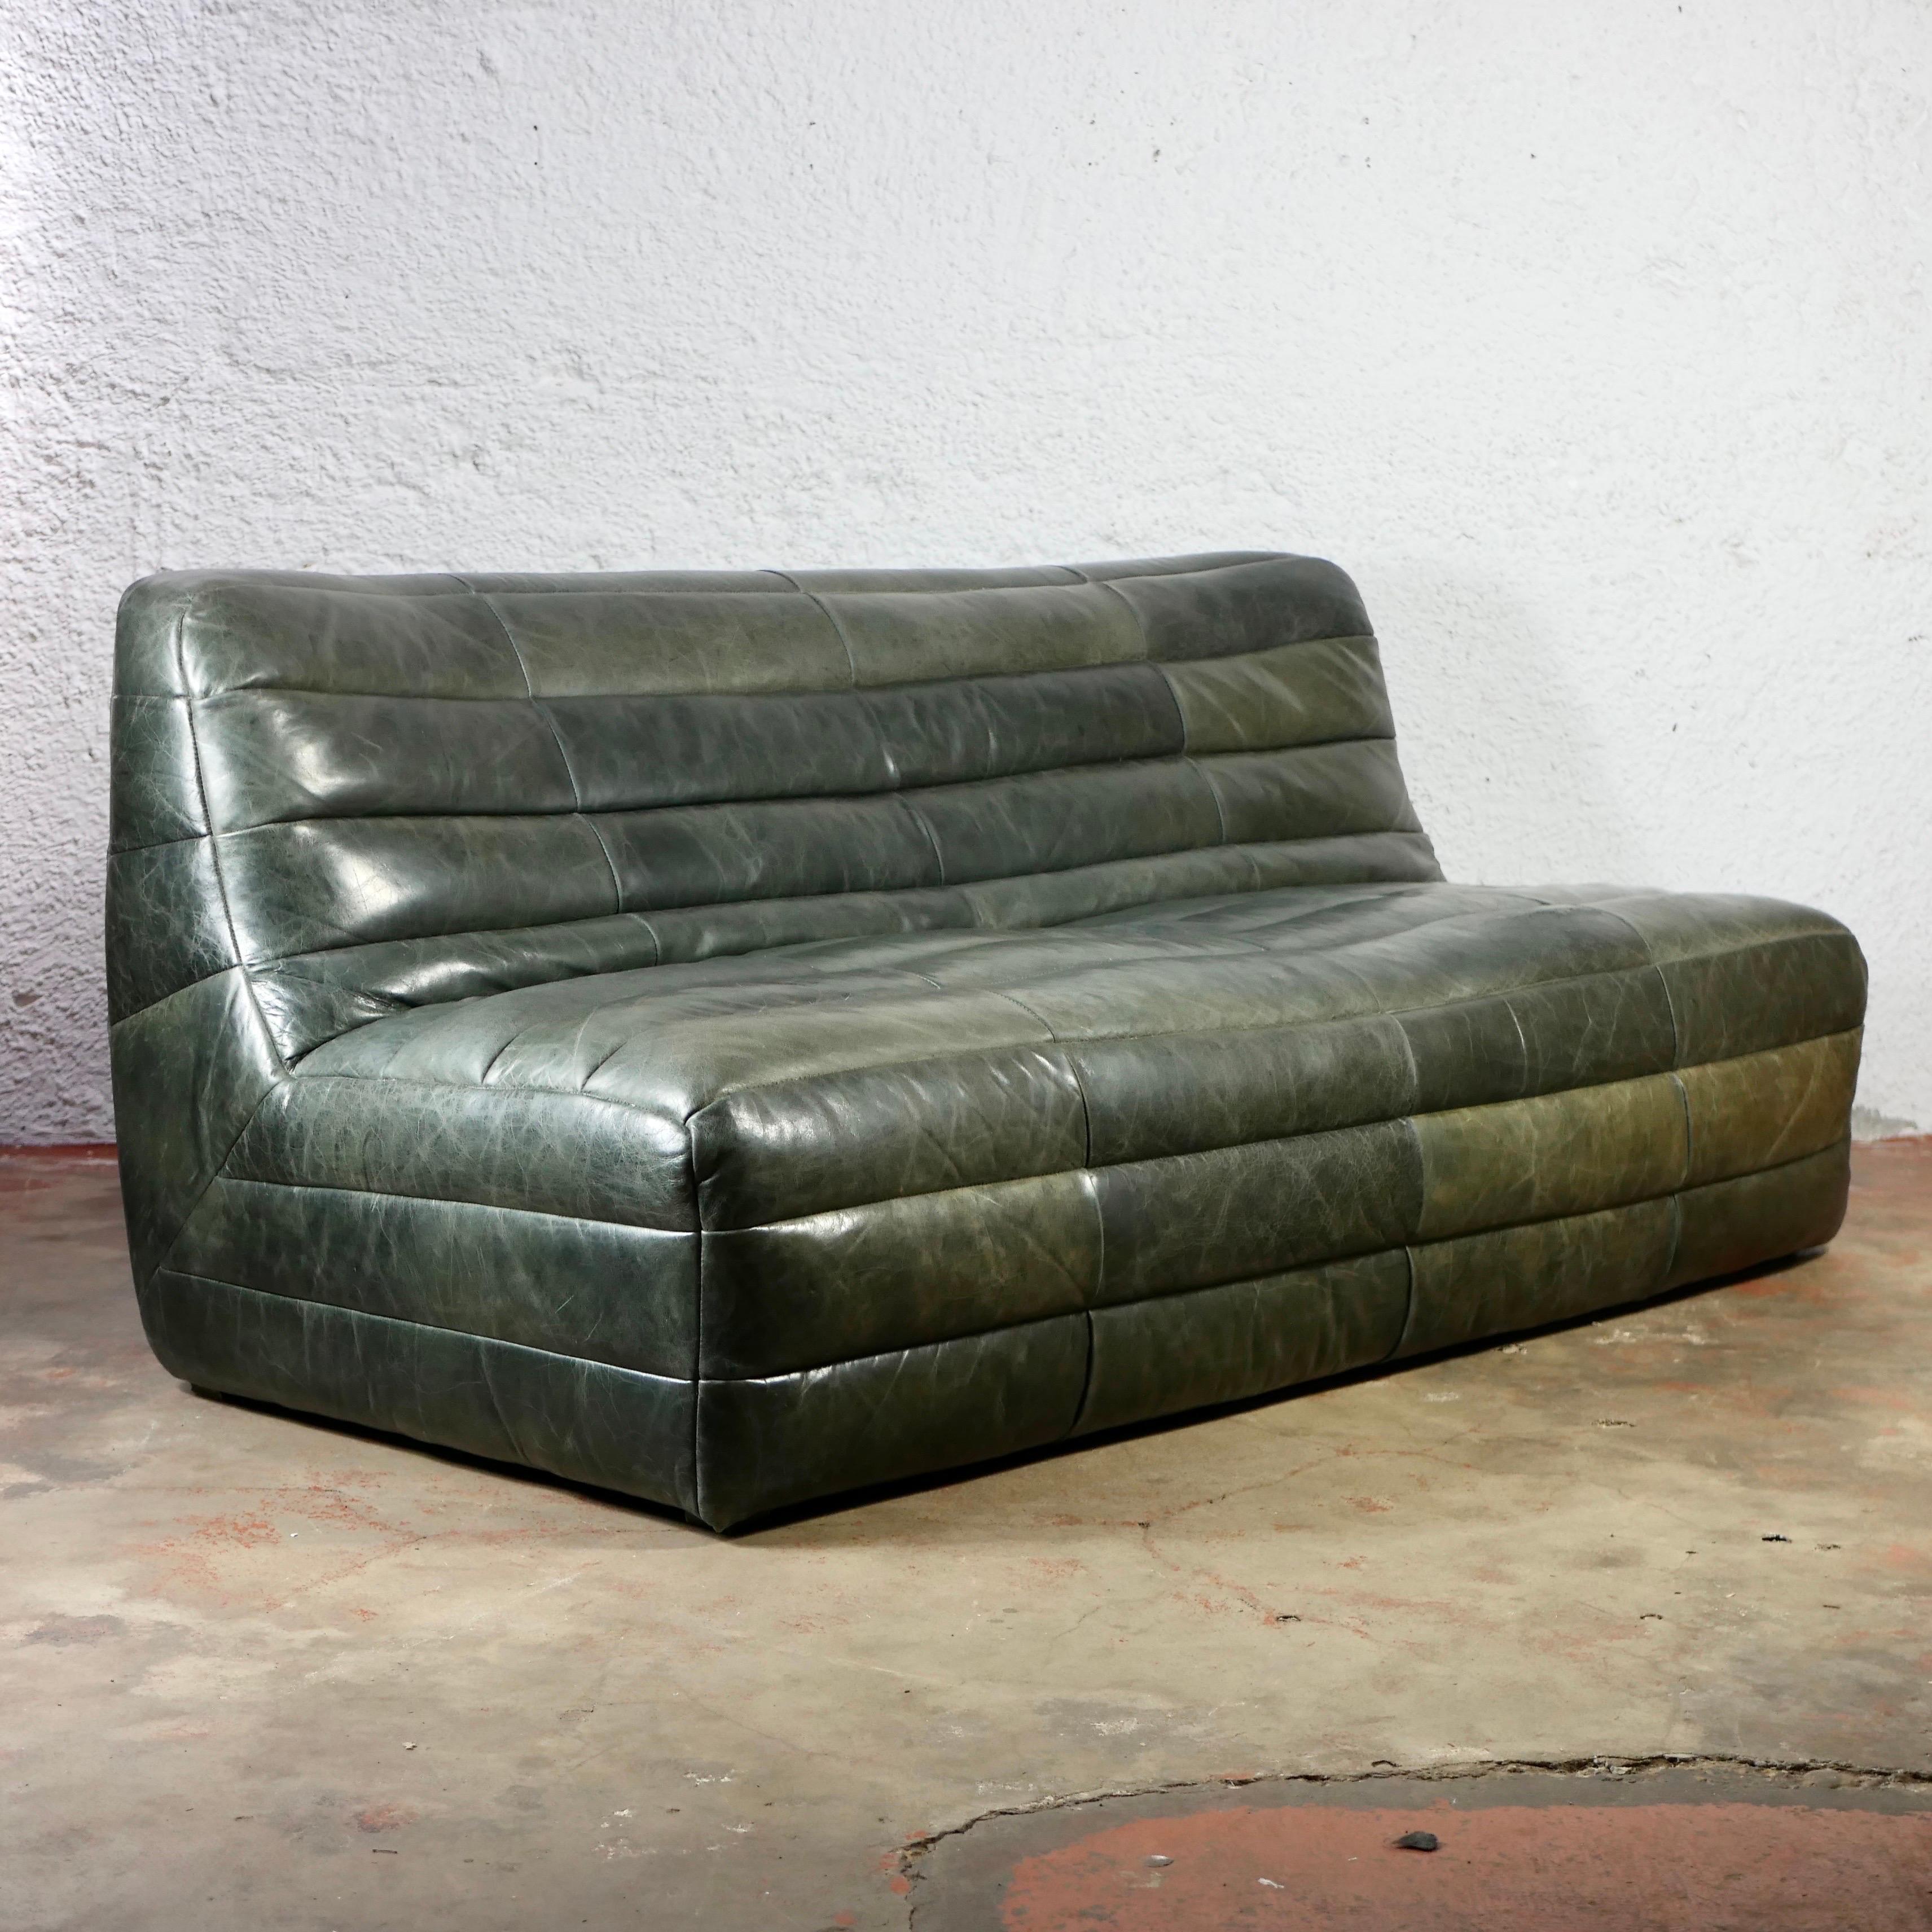 Gorgeous patchwork leather sofa in the style of De Sede, made in France in the 1980s, with a nice patina.
Beautiful green olive colour, simple shape with nice leather cutting design, rounded edges, nice details, seats 3 persons.
Nice overall